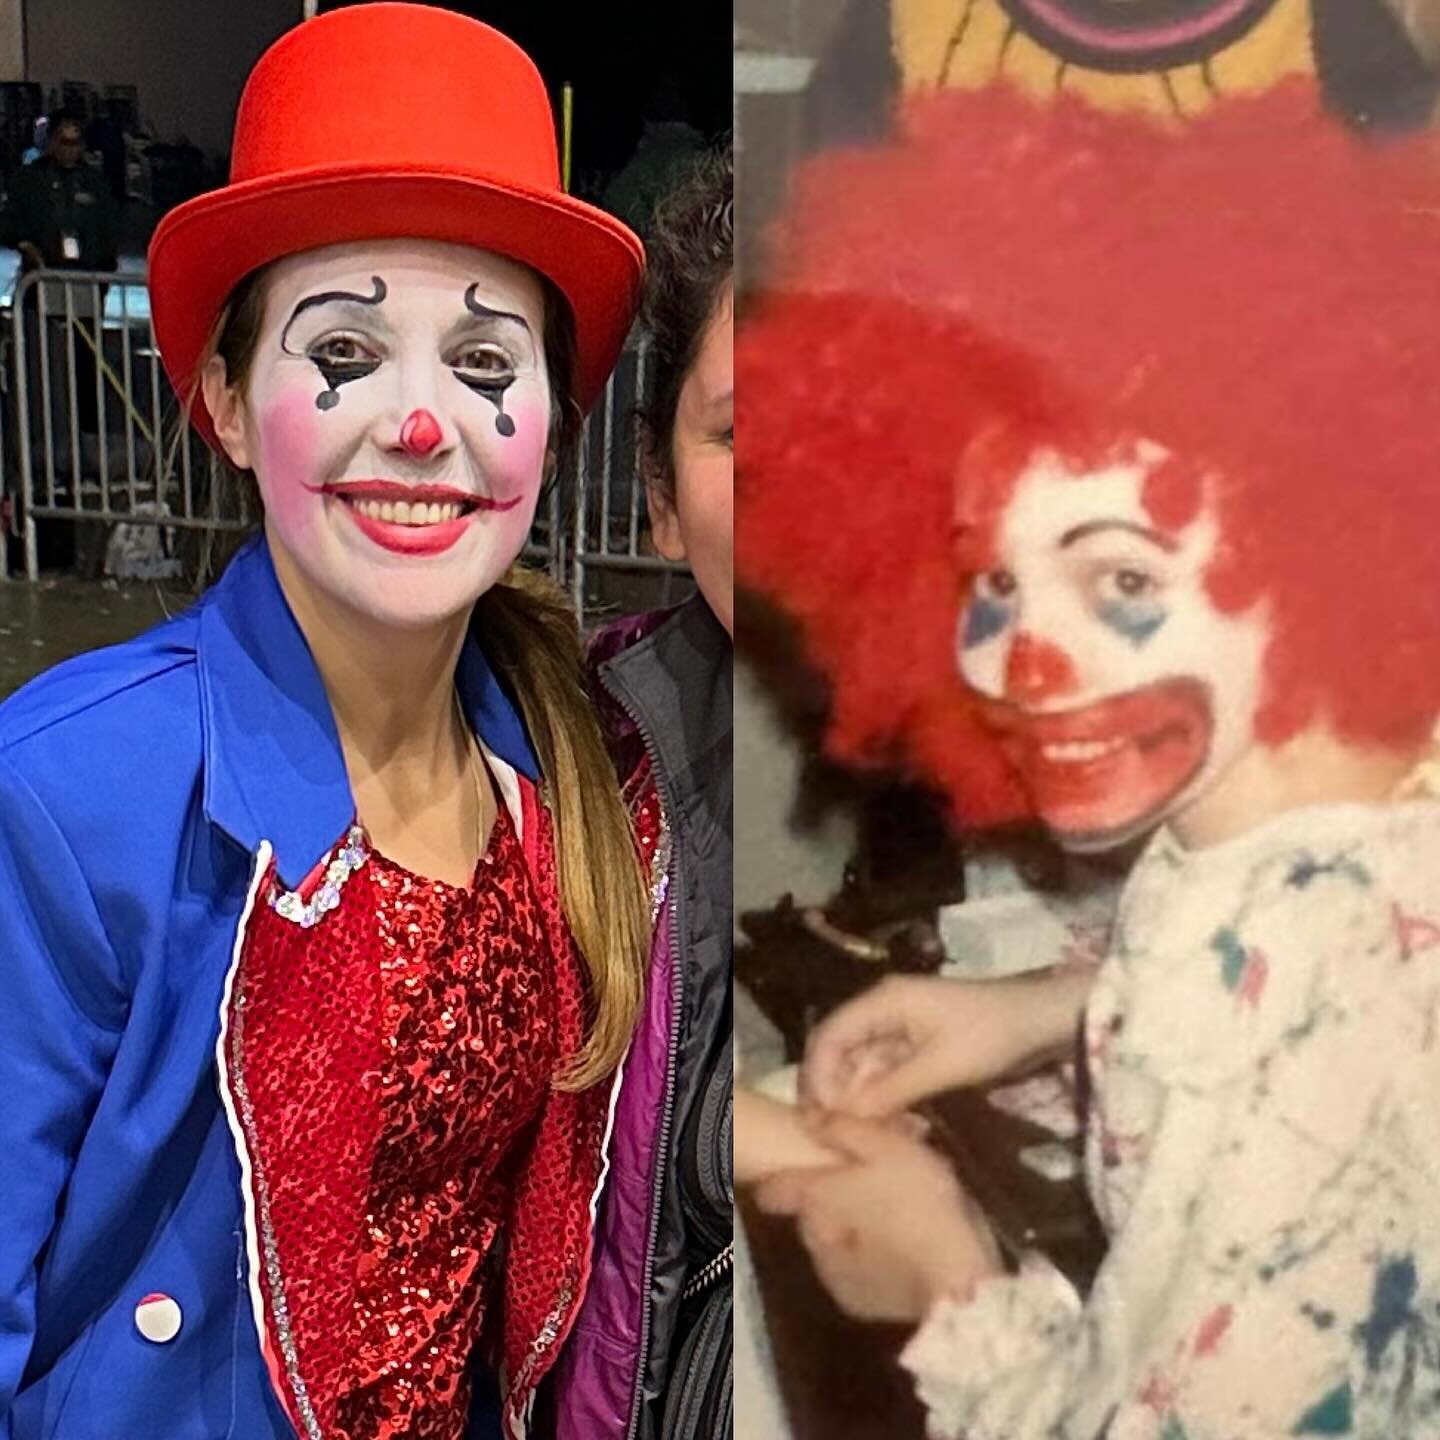 One week ago today, I performed on stilts with the @avenuersnyb in the Fancy Brigade show. It is always a great experience to be on stage at the PA Convention Center with incredibly talented performers! 

Painting my face as a clown for this event, r